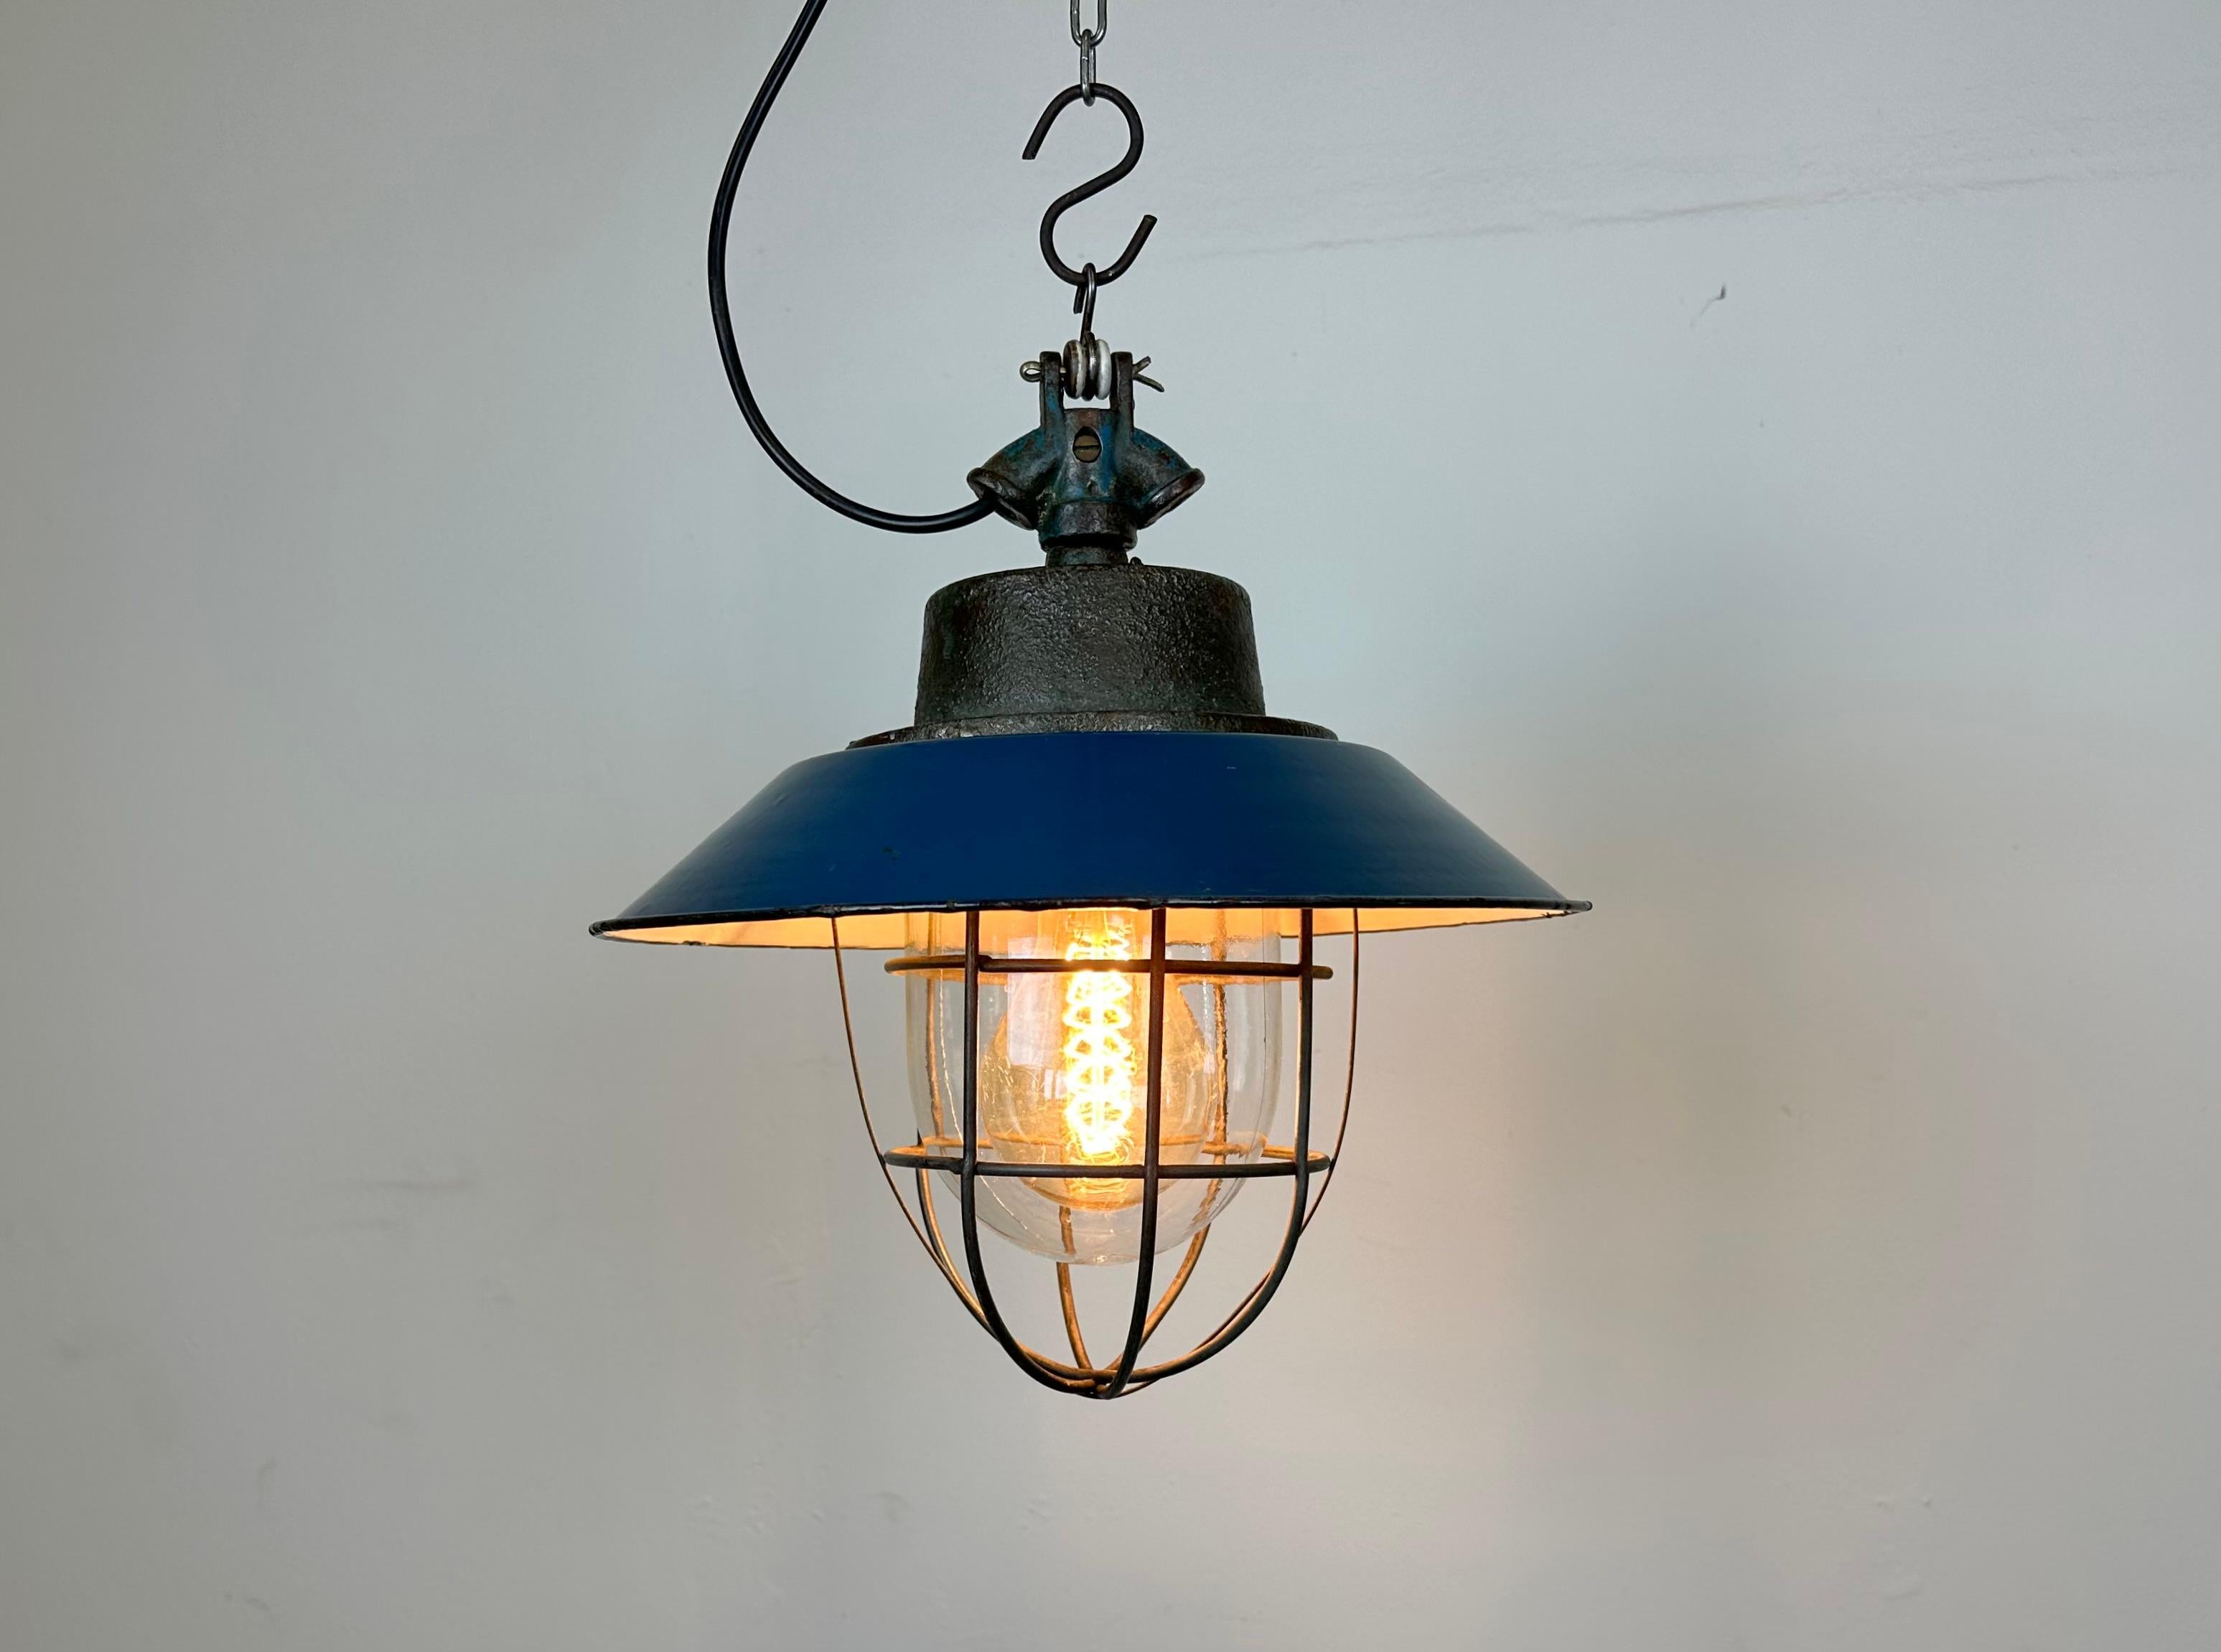 Blue Enamel and Cast Iron Industrial Cage Pendant Light, 1960s For Sale 6